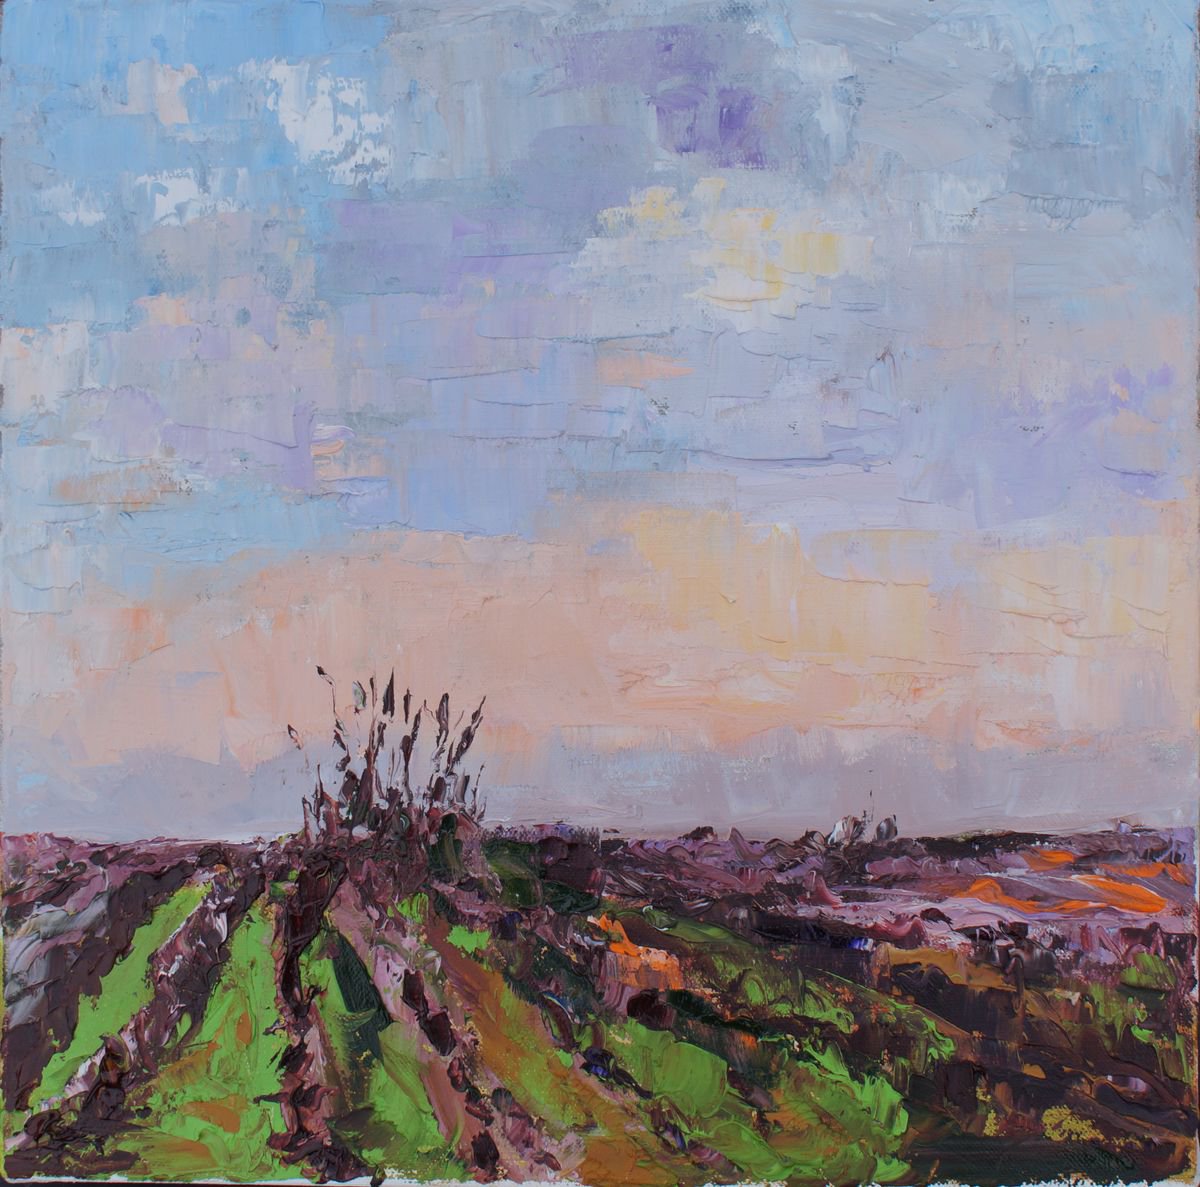 Winter Vines late afternoon sky by Ann Palmer